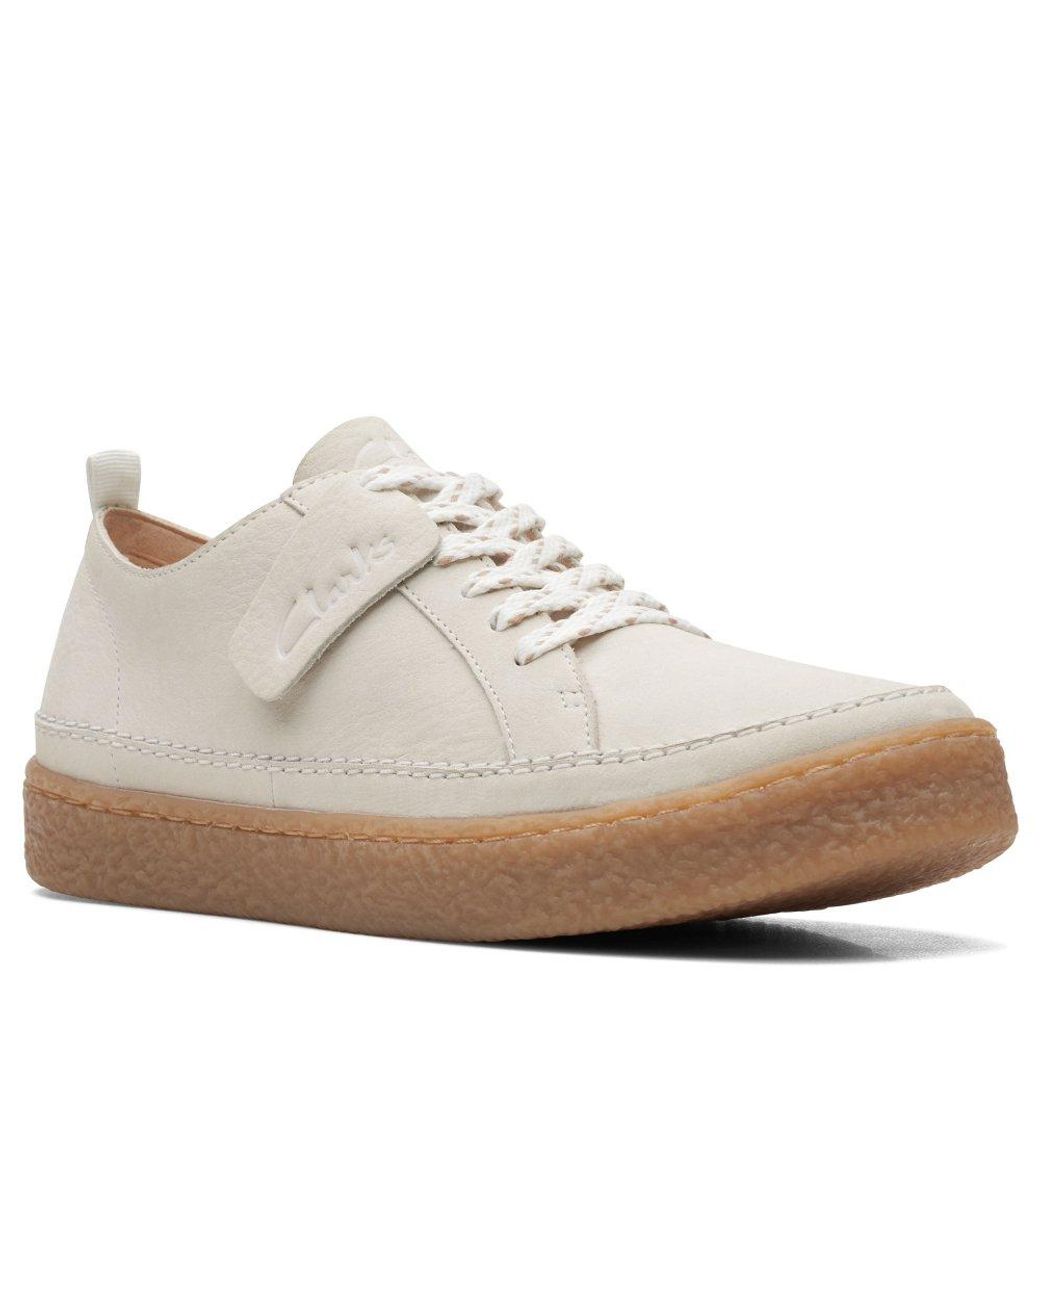 Clarks Barleigh Lace Trainers in White | Lyst Canada